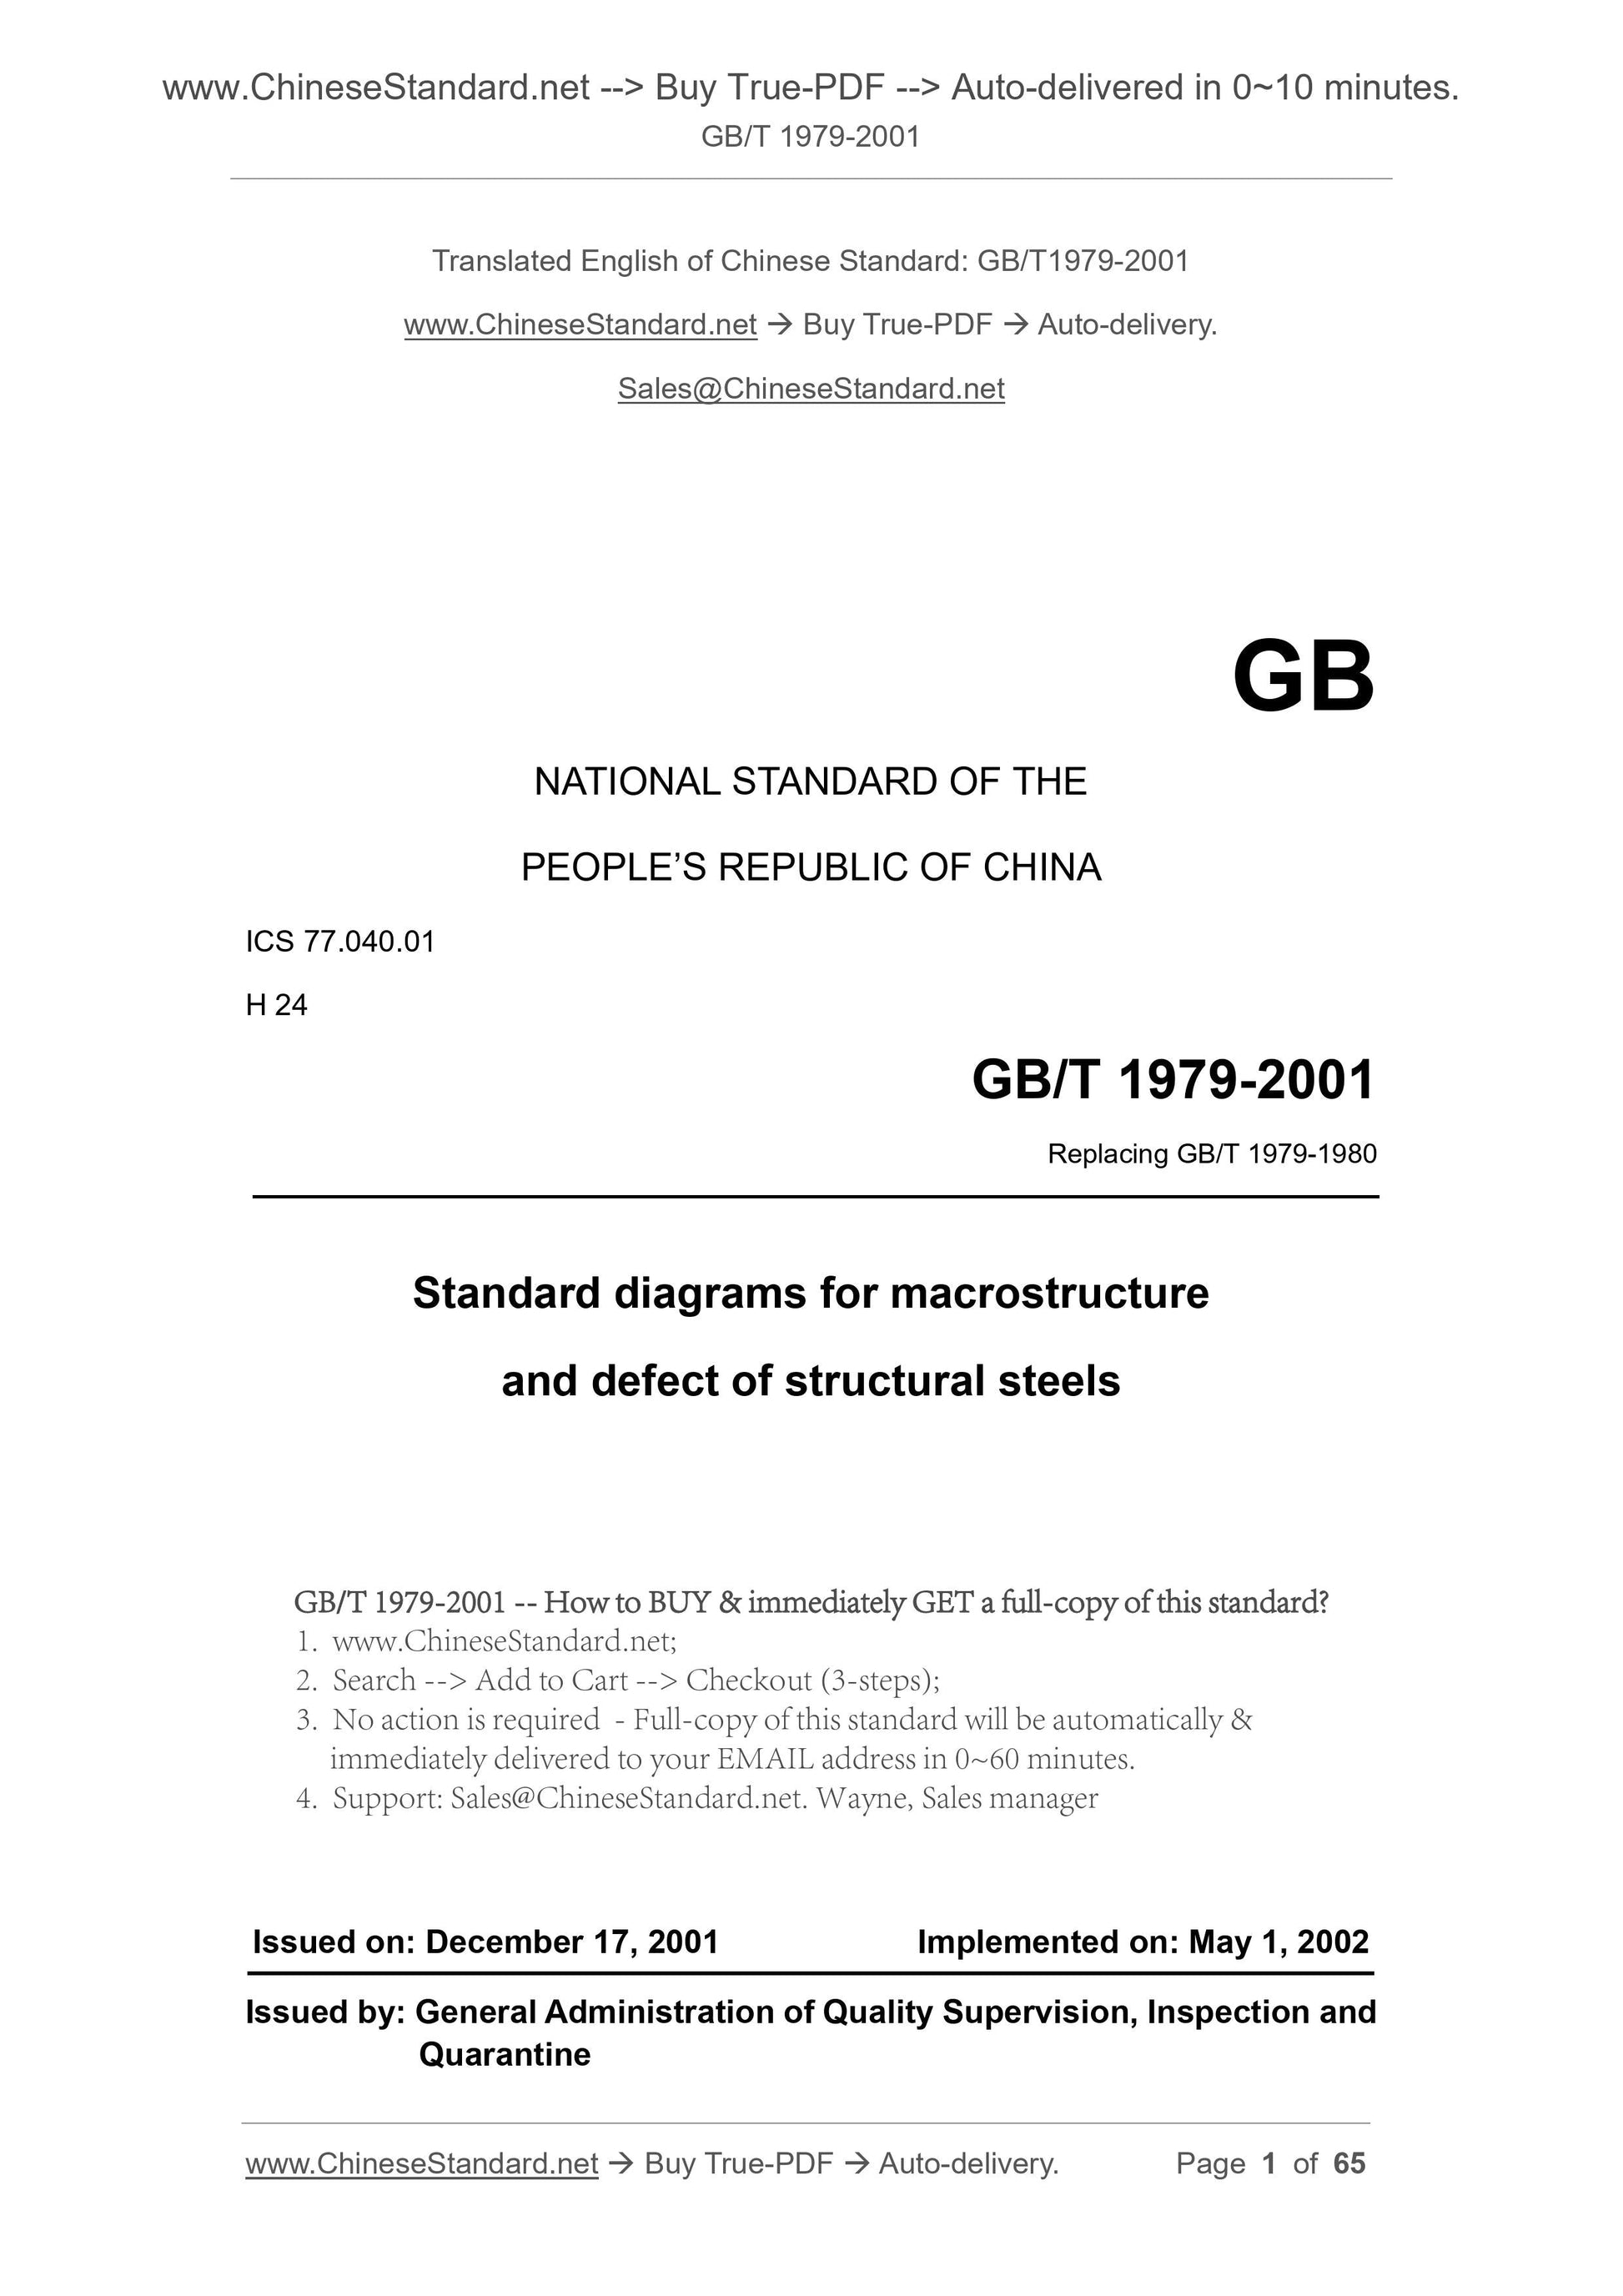 GB/T 1979-2001 Page 1